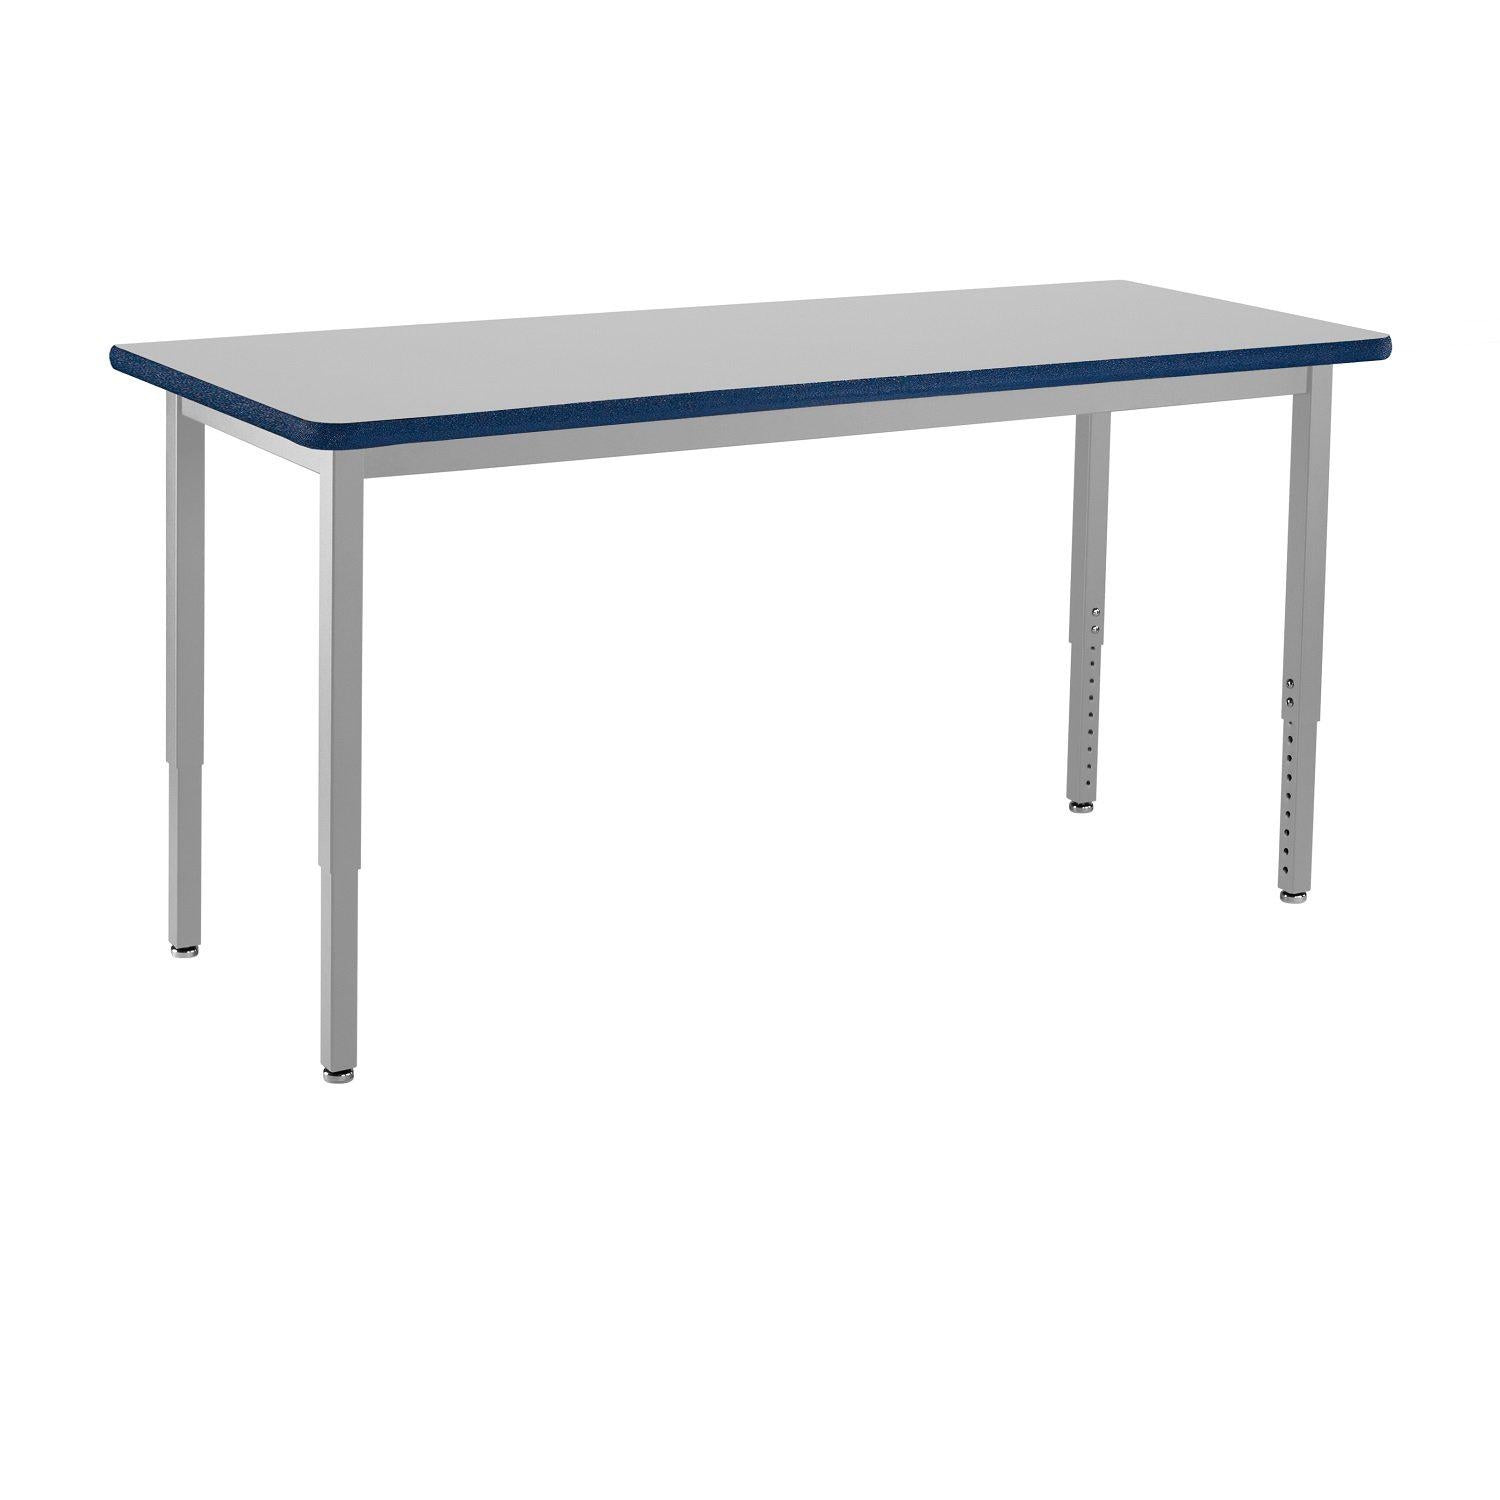 Heavy-Duty Height-Adjustable Utility Table, Soft Grey Frame, 30" x 60", Supreme High-Pressure Laminate Top with Black ProtectEdge